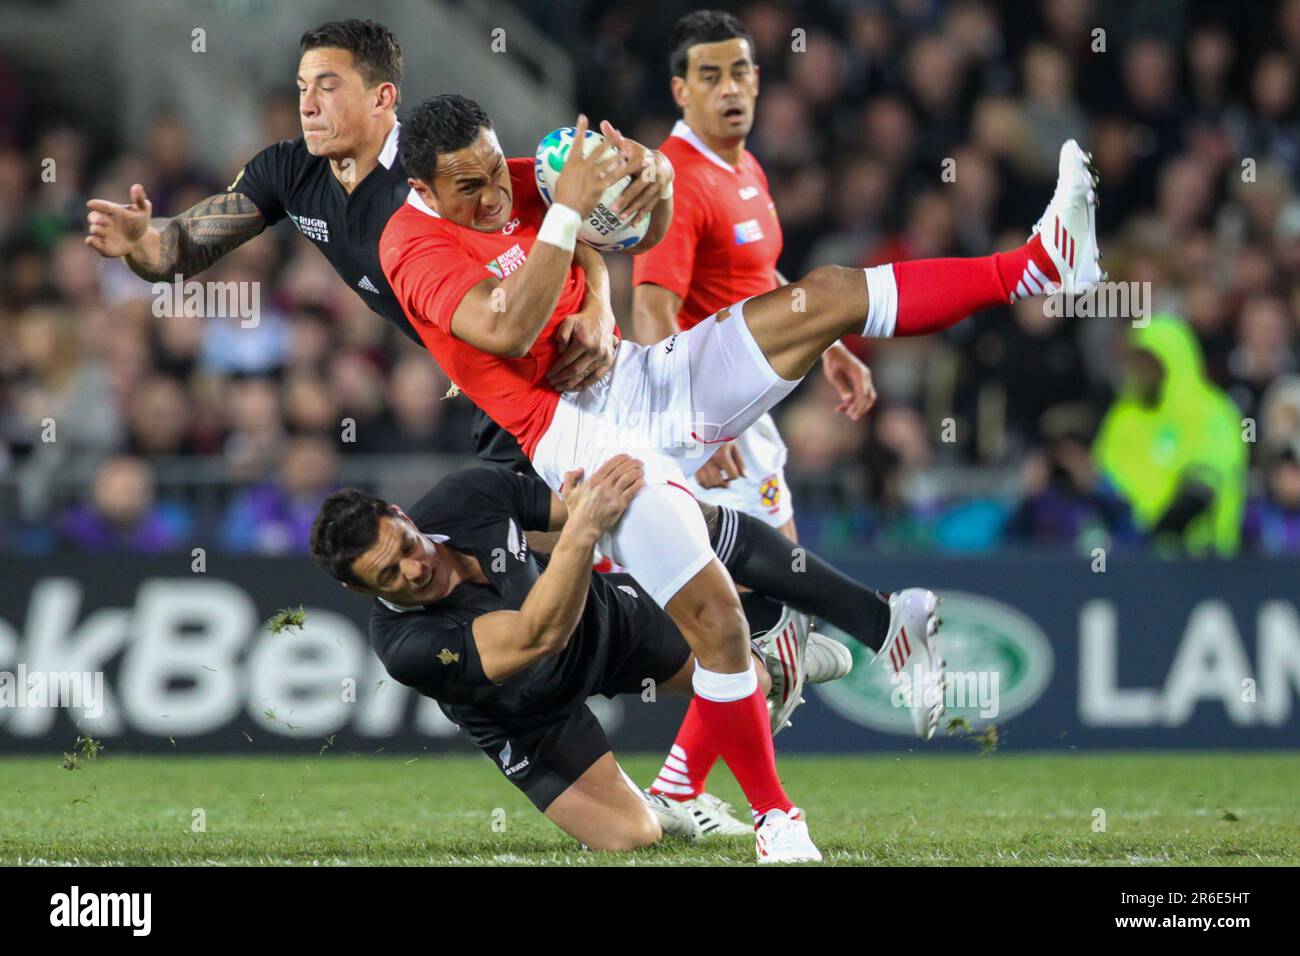 New Zealand's Sonny Bill Williams and Daniel Carter  bring down Tonga's  Andre Ma'ilei during the opening match of the Rugby World Cup 2011, Eden Park, Auckland, New Zealand, Friday, September 09, 2011. Stock Photo